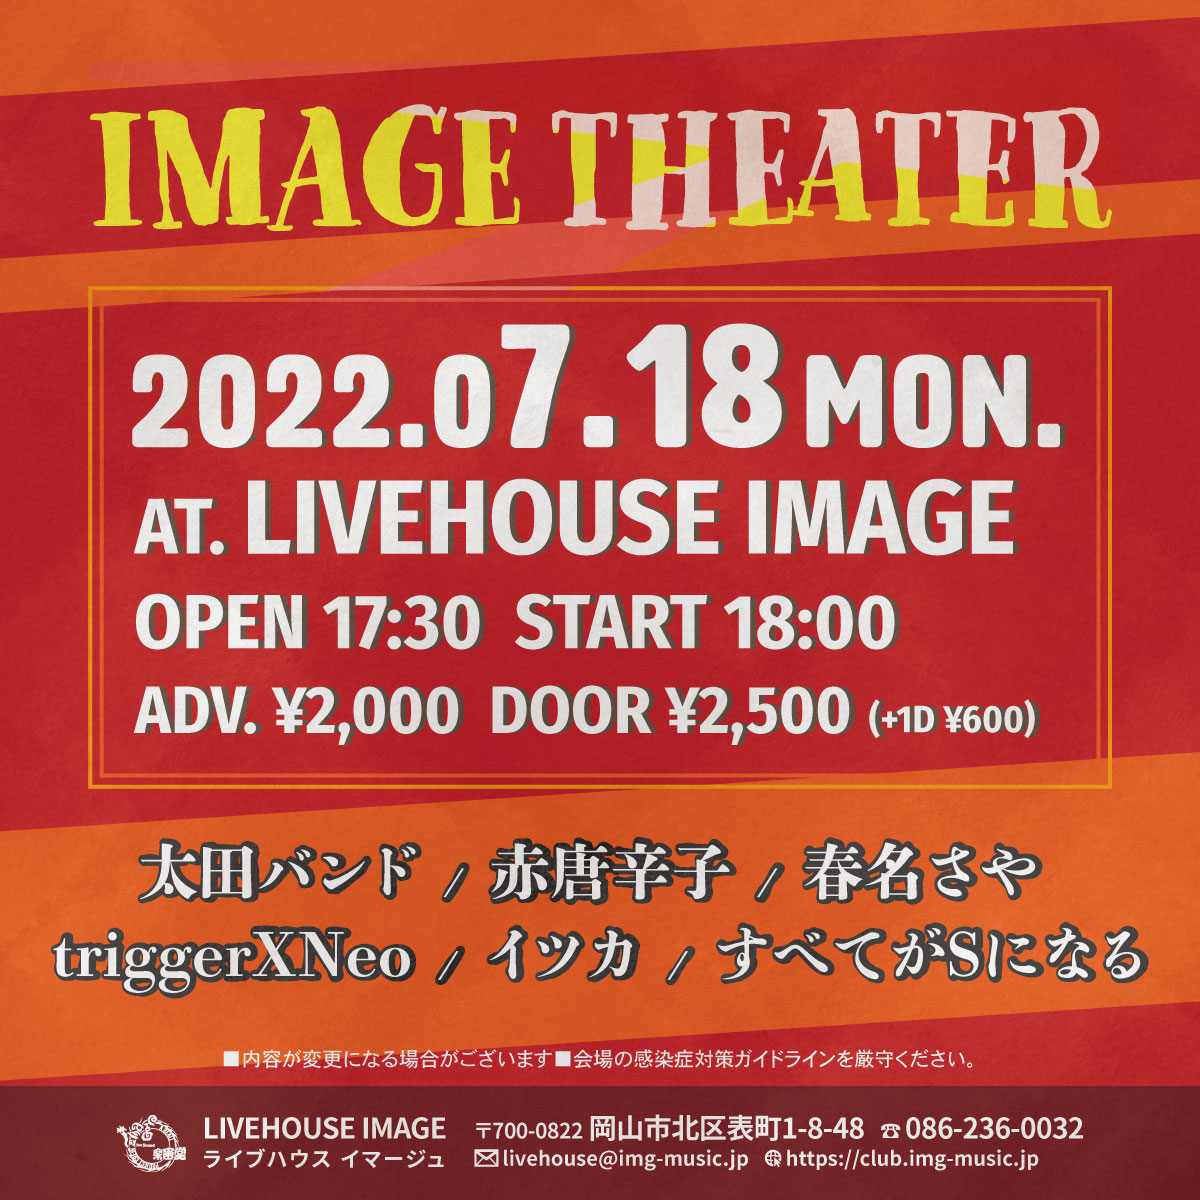 IMAGE THEATER